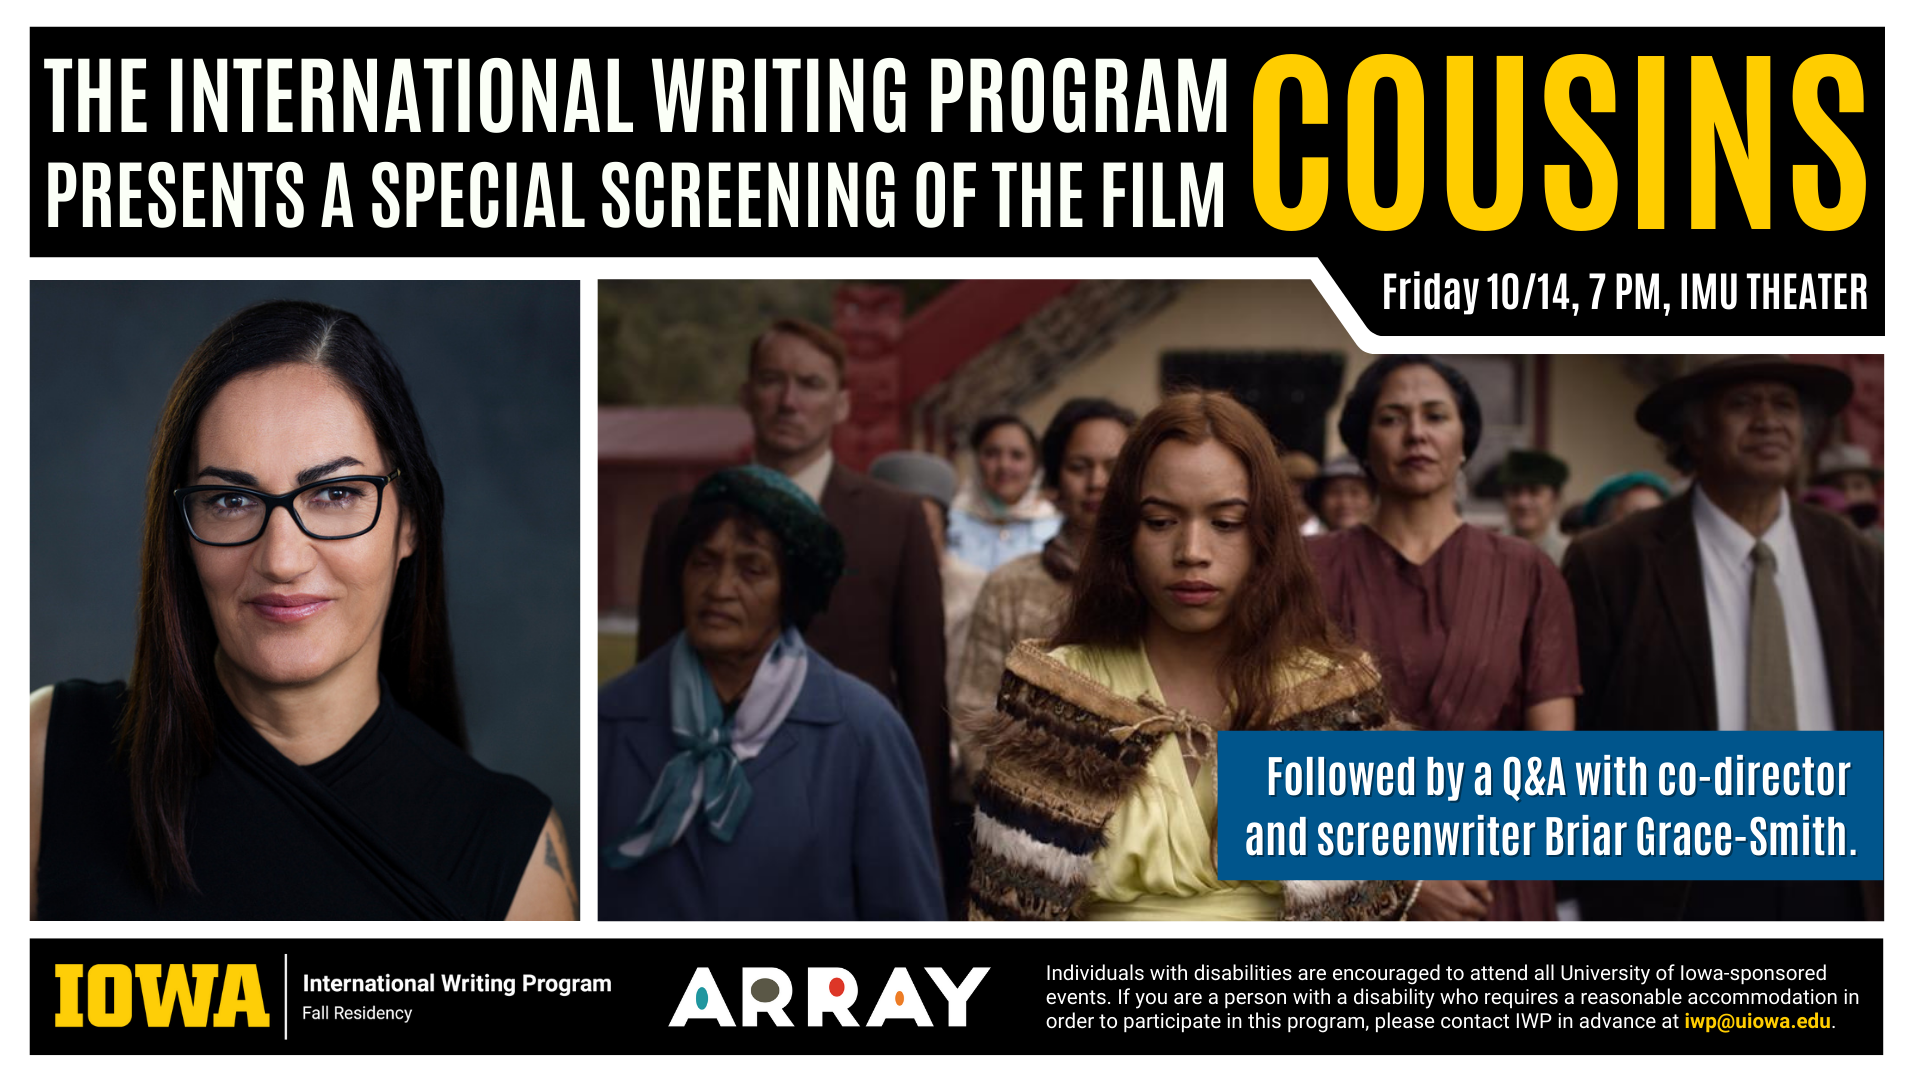 An image whose heading reads, "The International Writing Program Presents a Special Screening of the Film COUSINS. Friday 10/14, 7 PM, IMU Theater." A text box below reads, "Followed by a Q&A with the co-director and screenwriter Briar Grace-Smith." There is a portrait of Grace-Smith beside a screenshot from the film, which features several people dressed in nice clothing standing outside, looking down or upward, all concerned. There is a logo for the film company ARRAY and the following text: Individuals with disabilities are encouraged to attend all University of Iowa-sponsored events. If you are a person with a disability who requires a reasonable accommodation in order to participate in this program, please contact IWP in advance at iwp@uiowa.edu." 